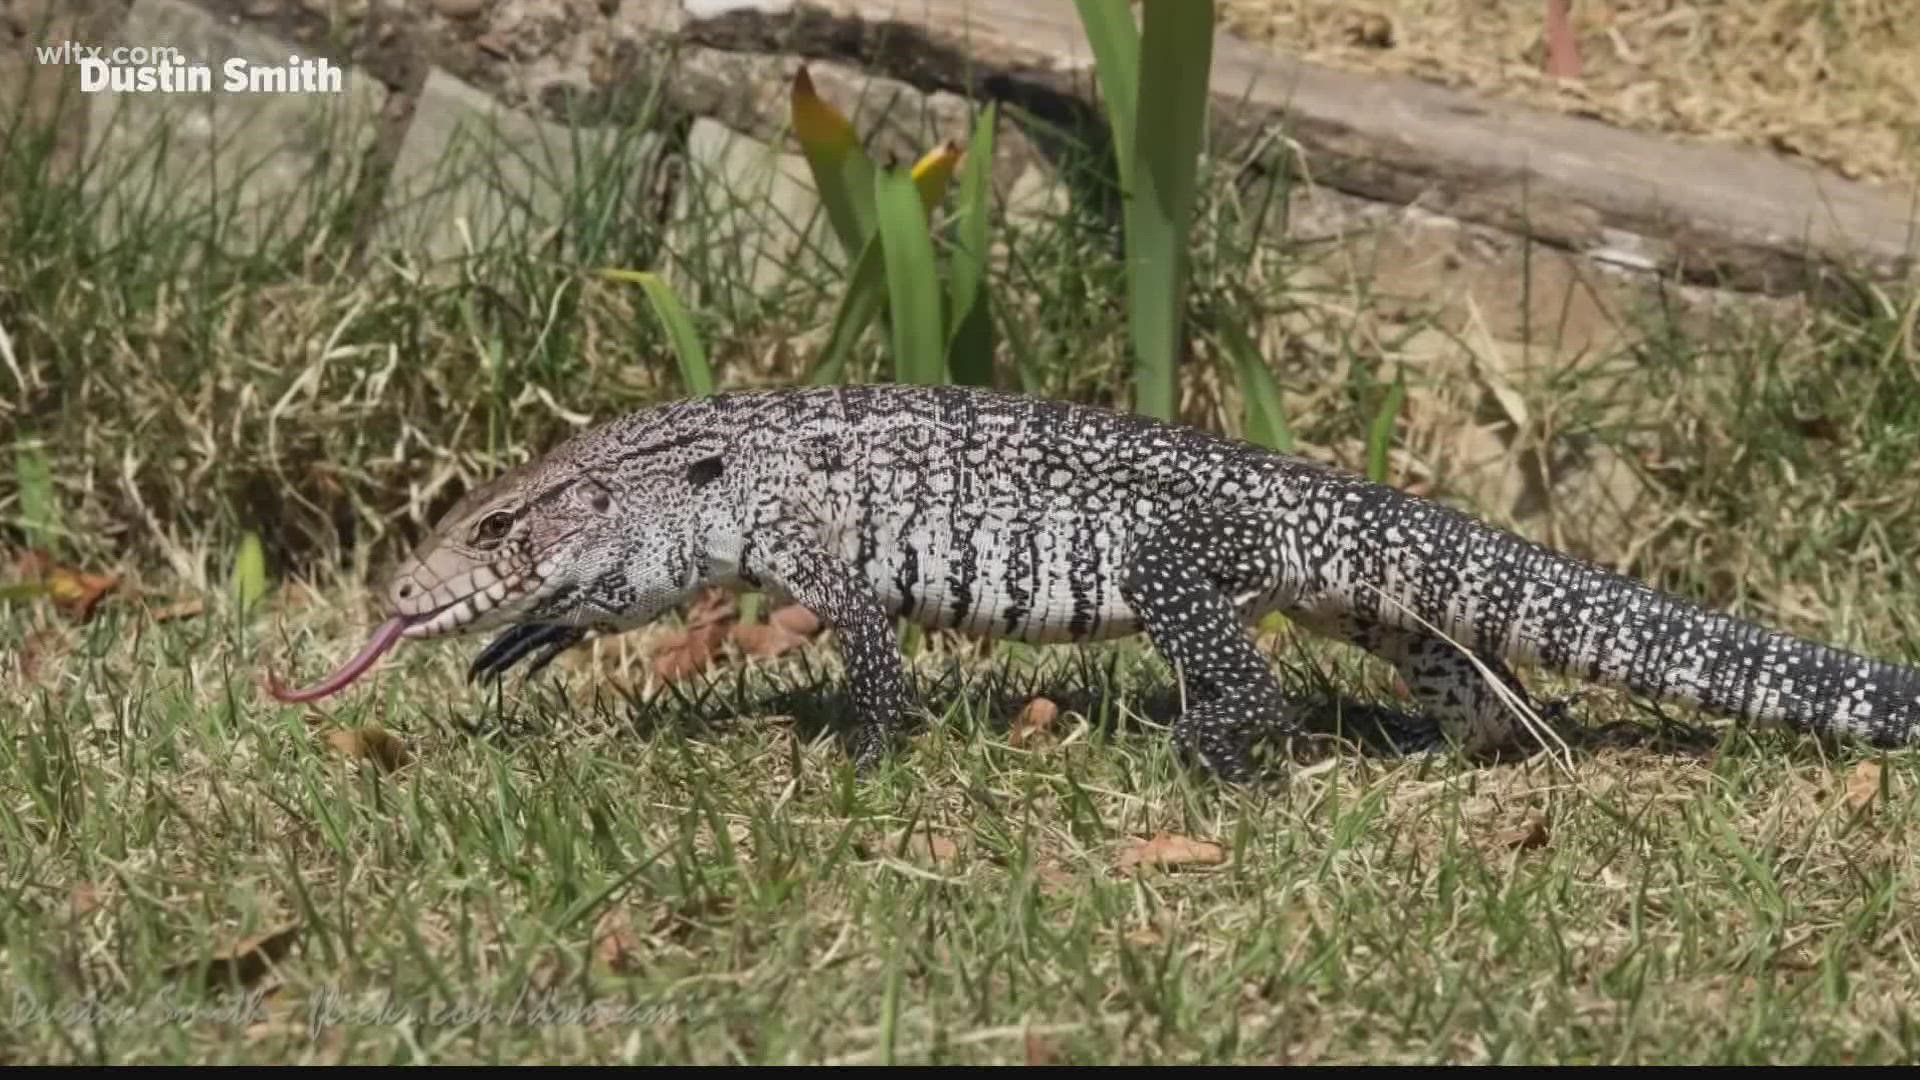 If you have a Tegu lizard or one or one of their hybrids, you must register it and microchip your lizard with the SC Dept. Natural Resources by September 25th.